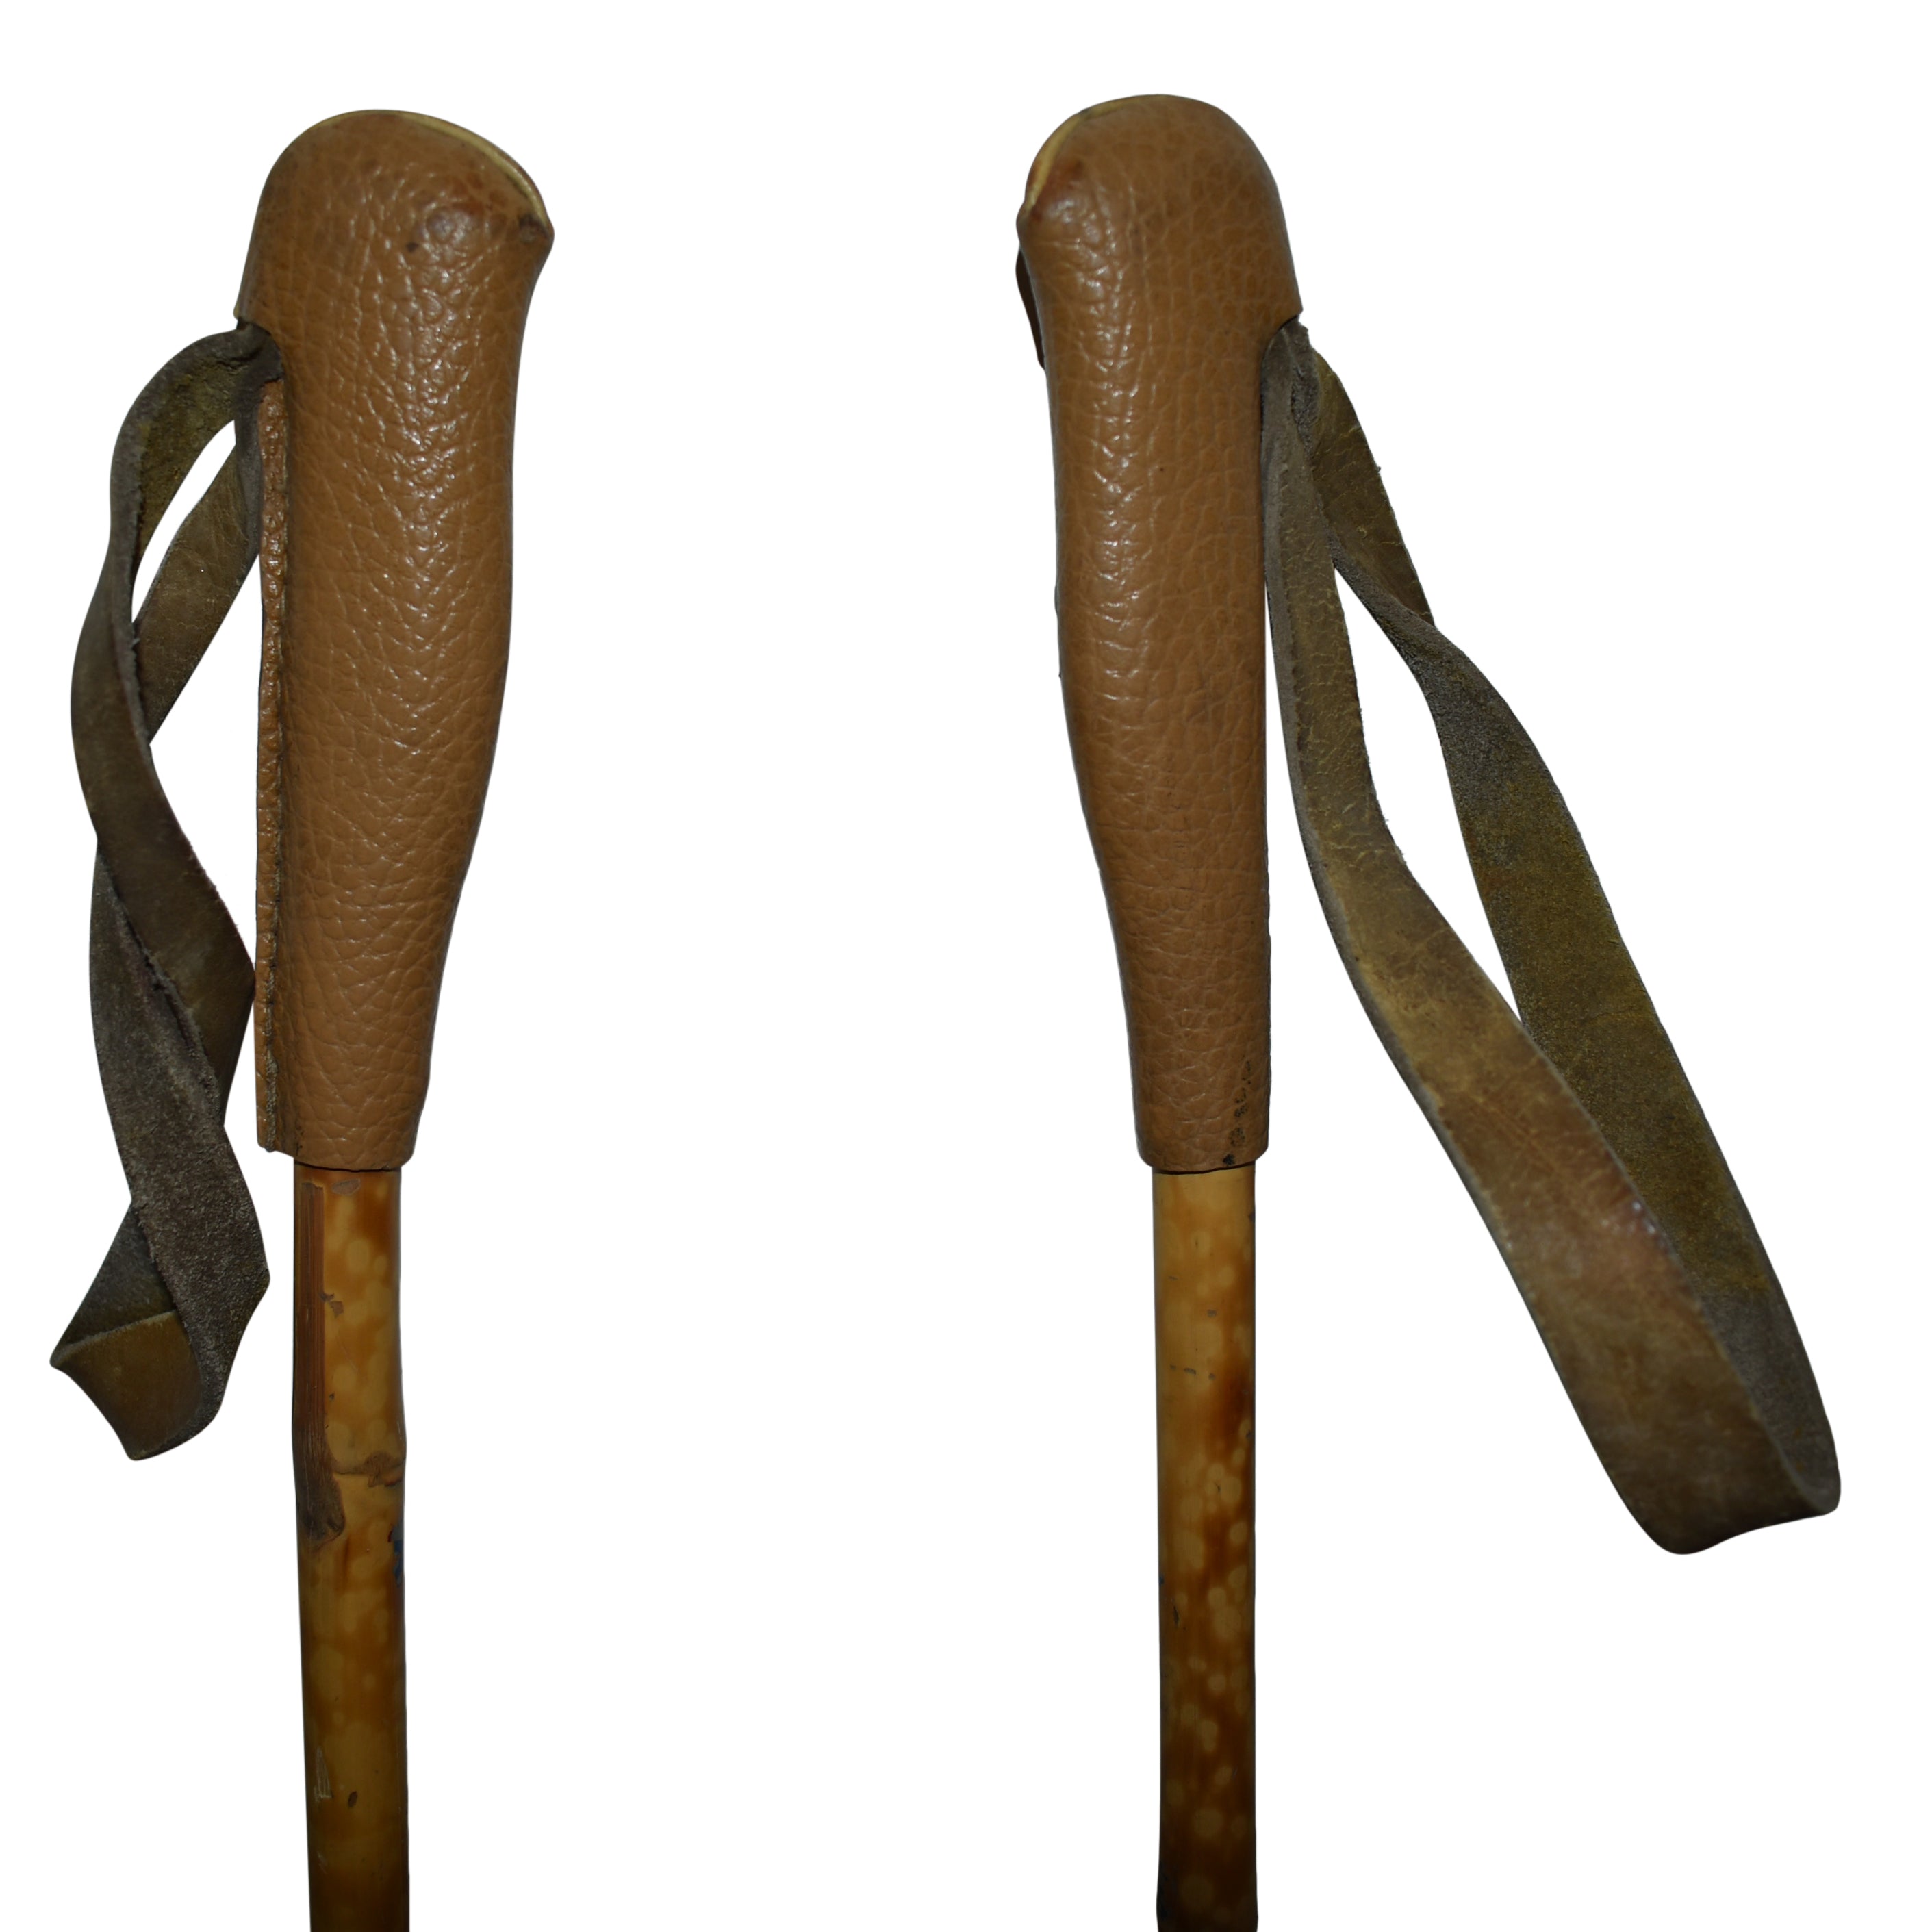 Bamboo Ski Poles with Leather Grips